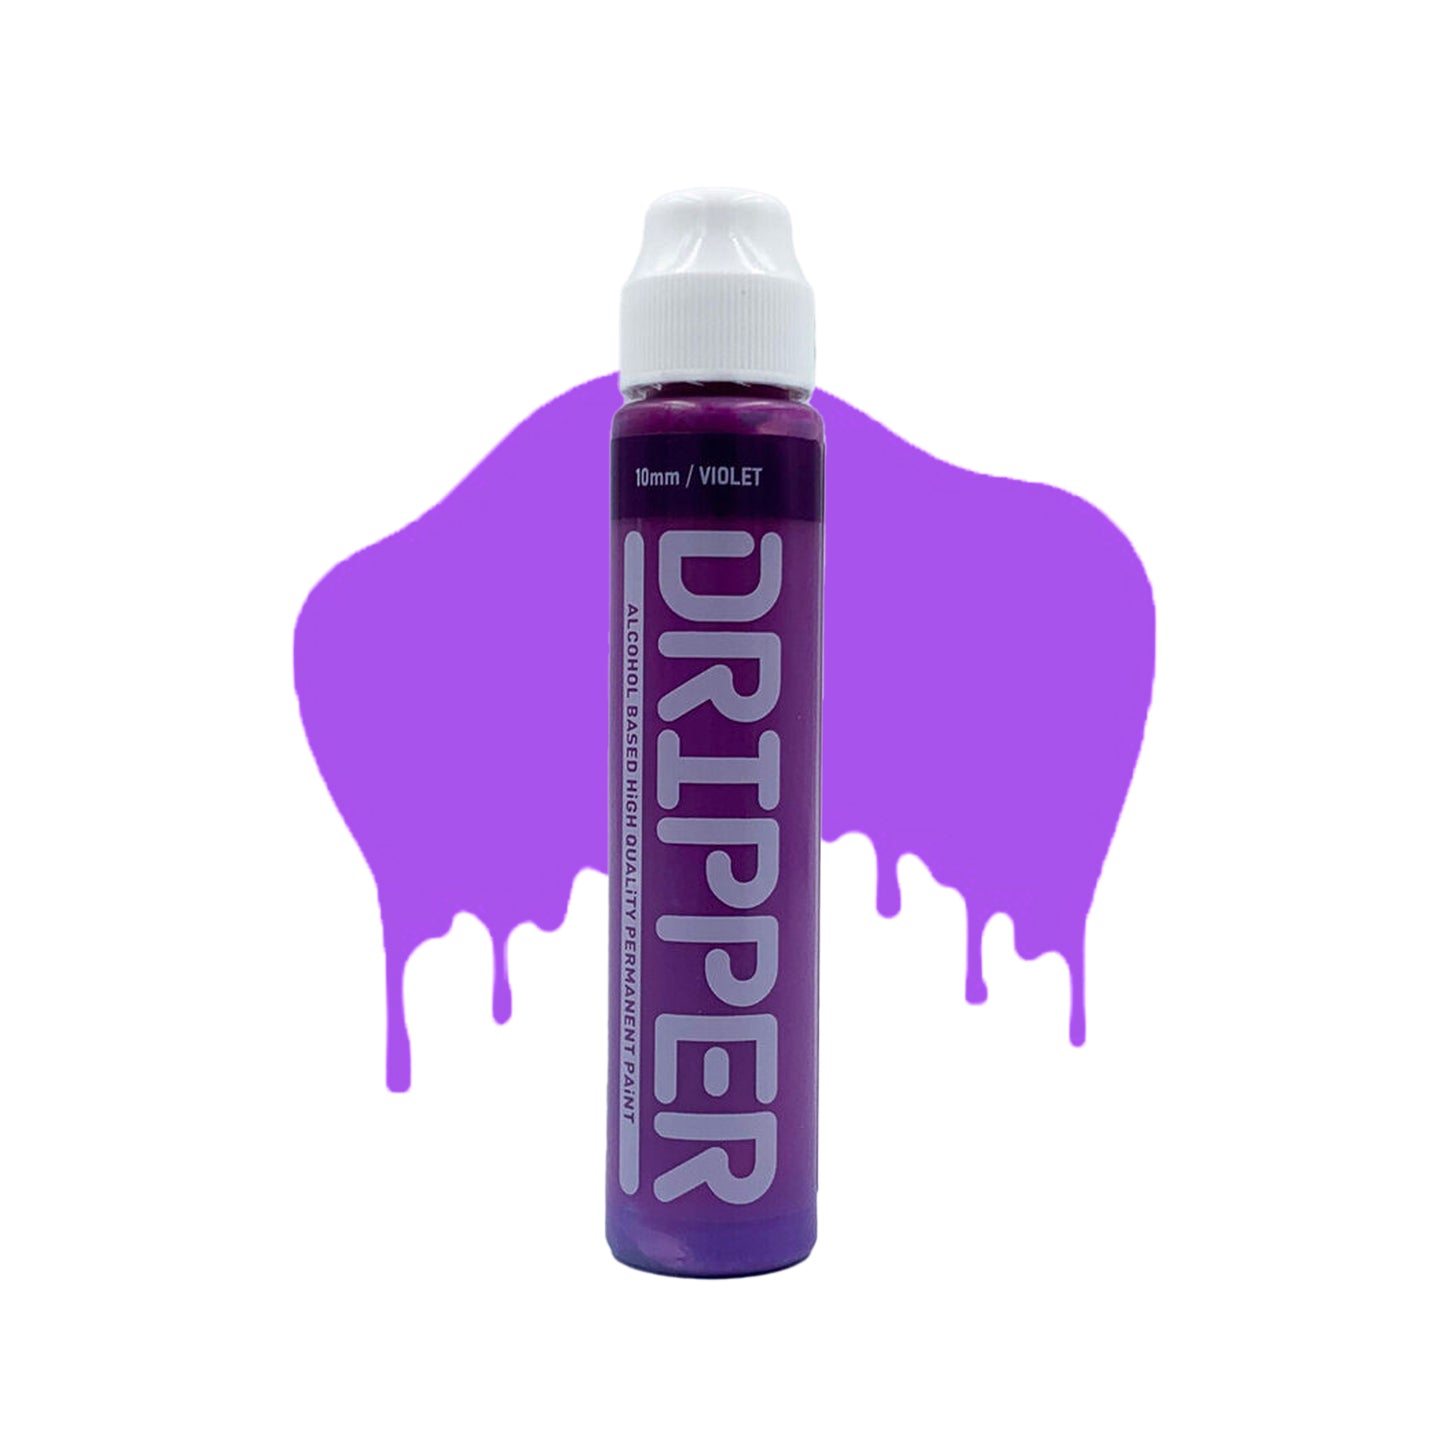 Violet mop container with white cap and the word "Dripper" written on the face in a bold black font. The mop is positioned in front of a white background with drips that match the violet color of the mop.